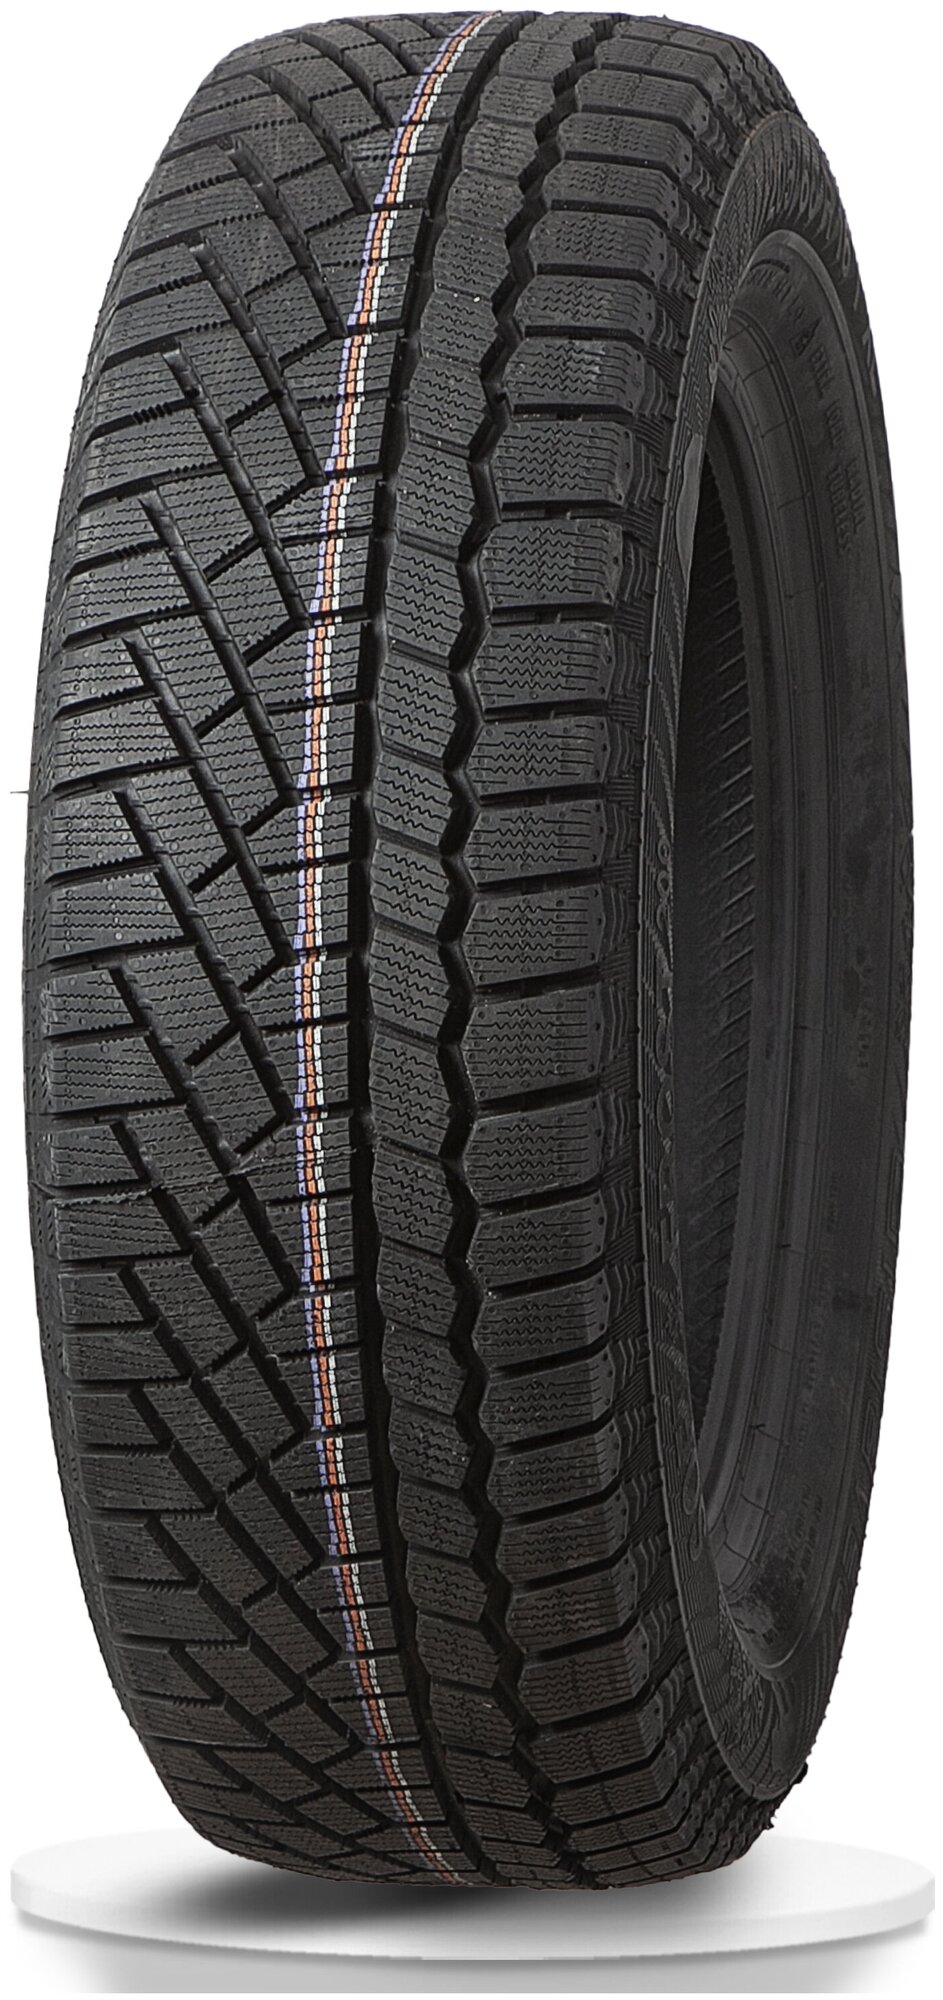  Gislaved Soft Frost 200 225/60 R17 103T